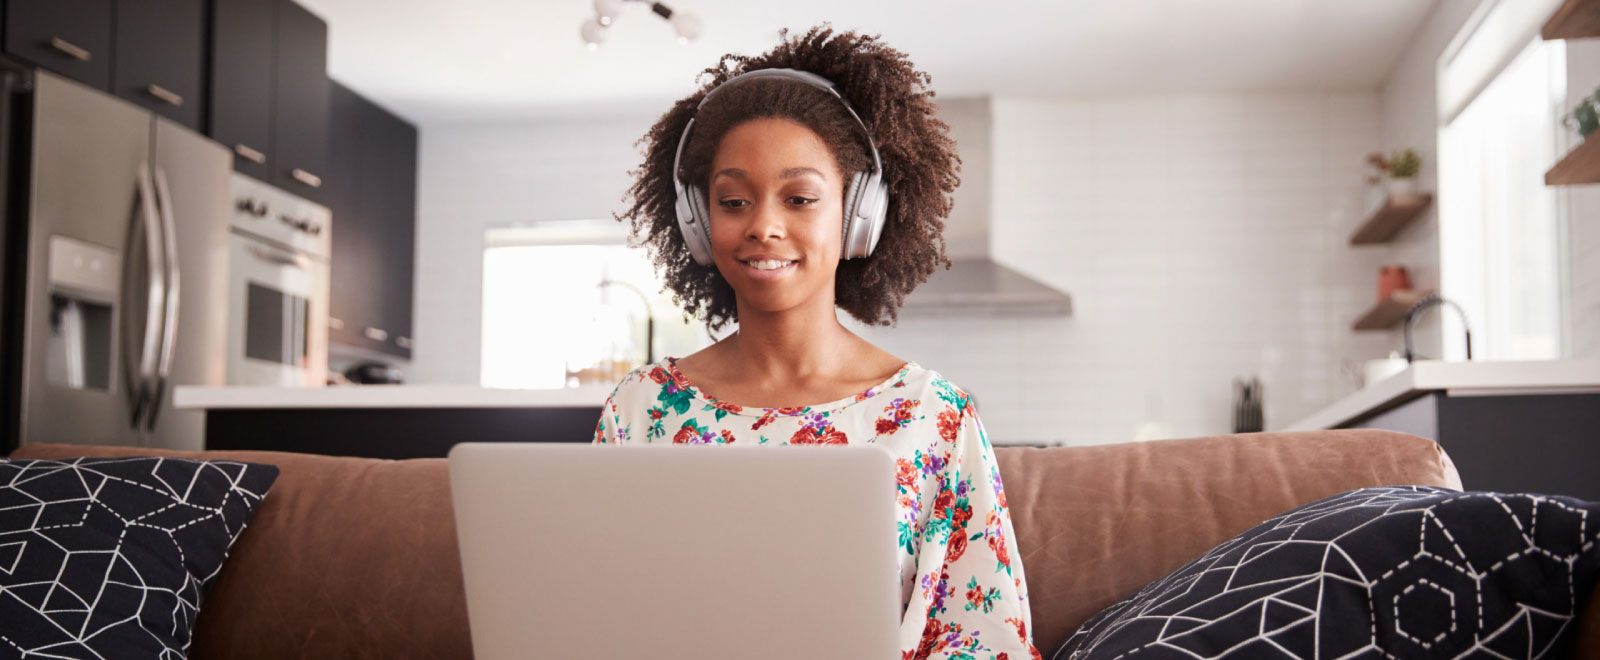 young woman working on computer with headphones